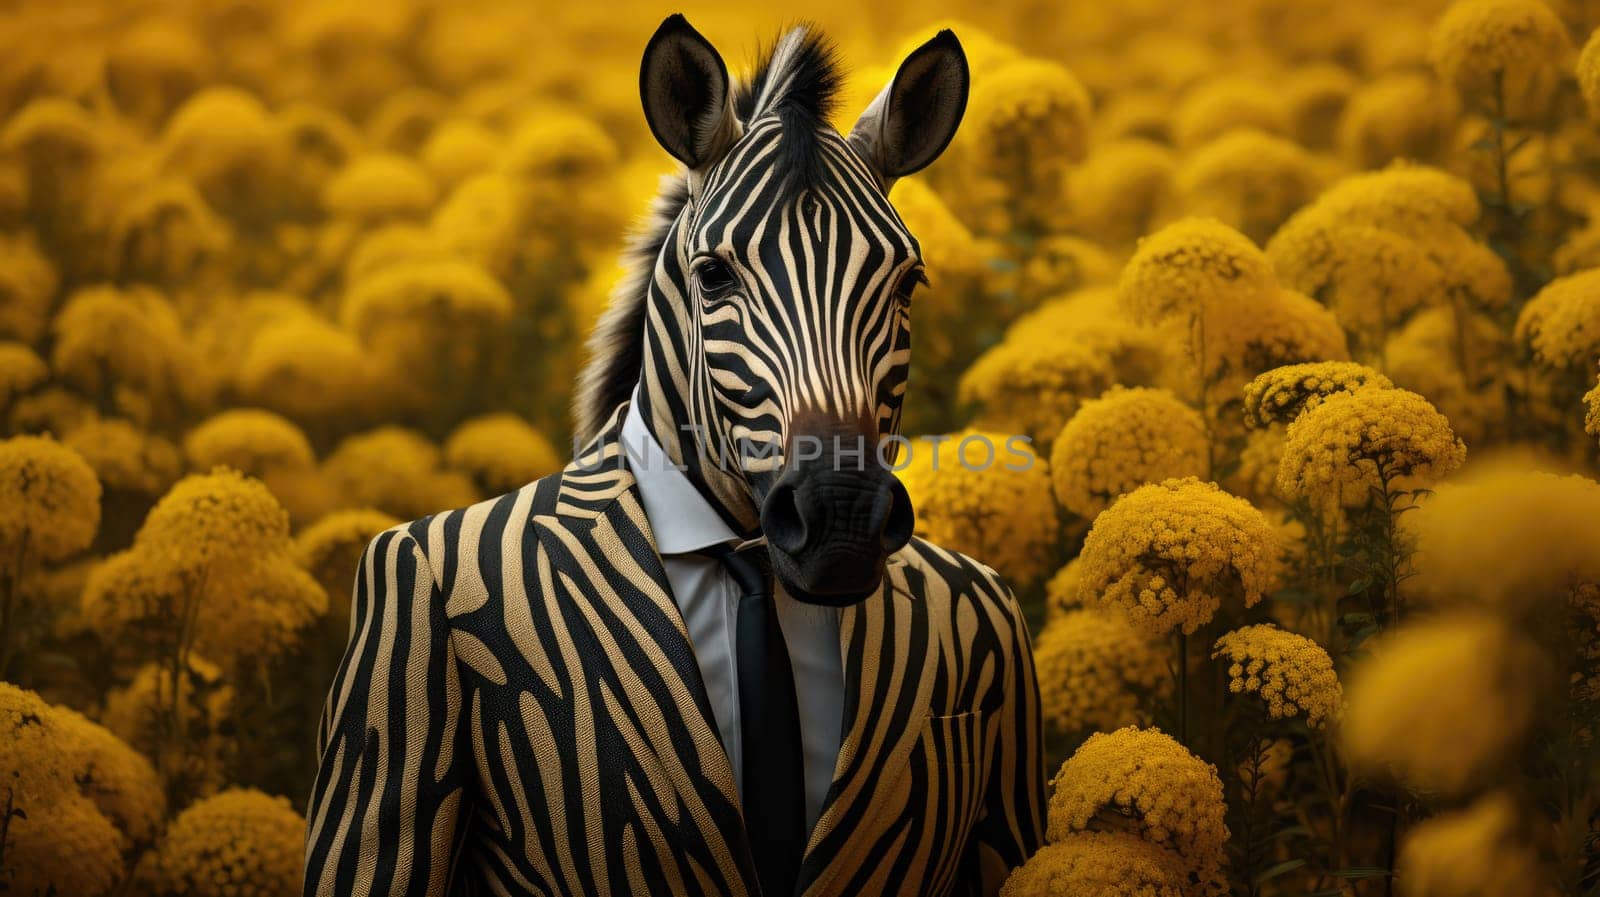 Zebra dressed in a suit, in a fantastical field of blossoming yellow flowers AI